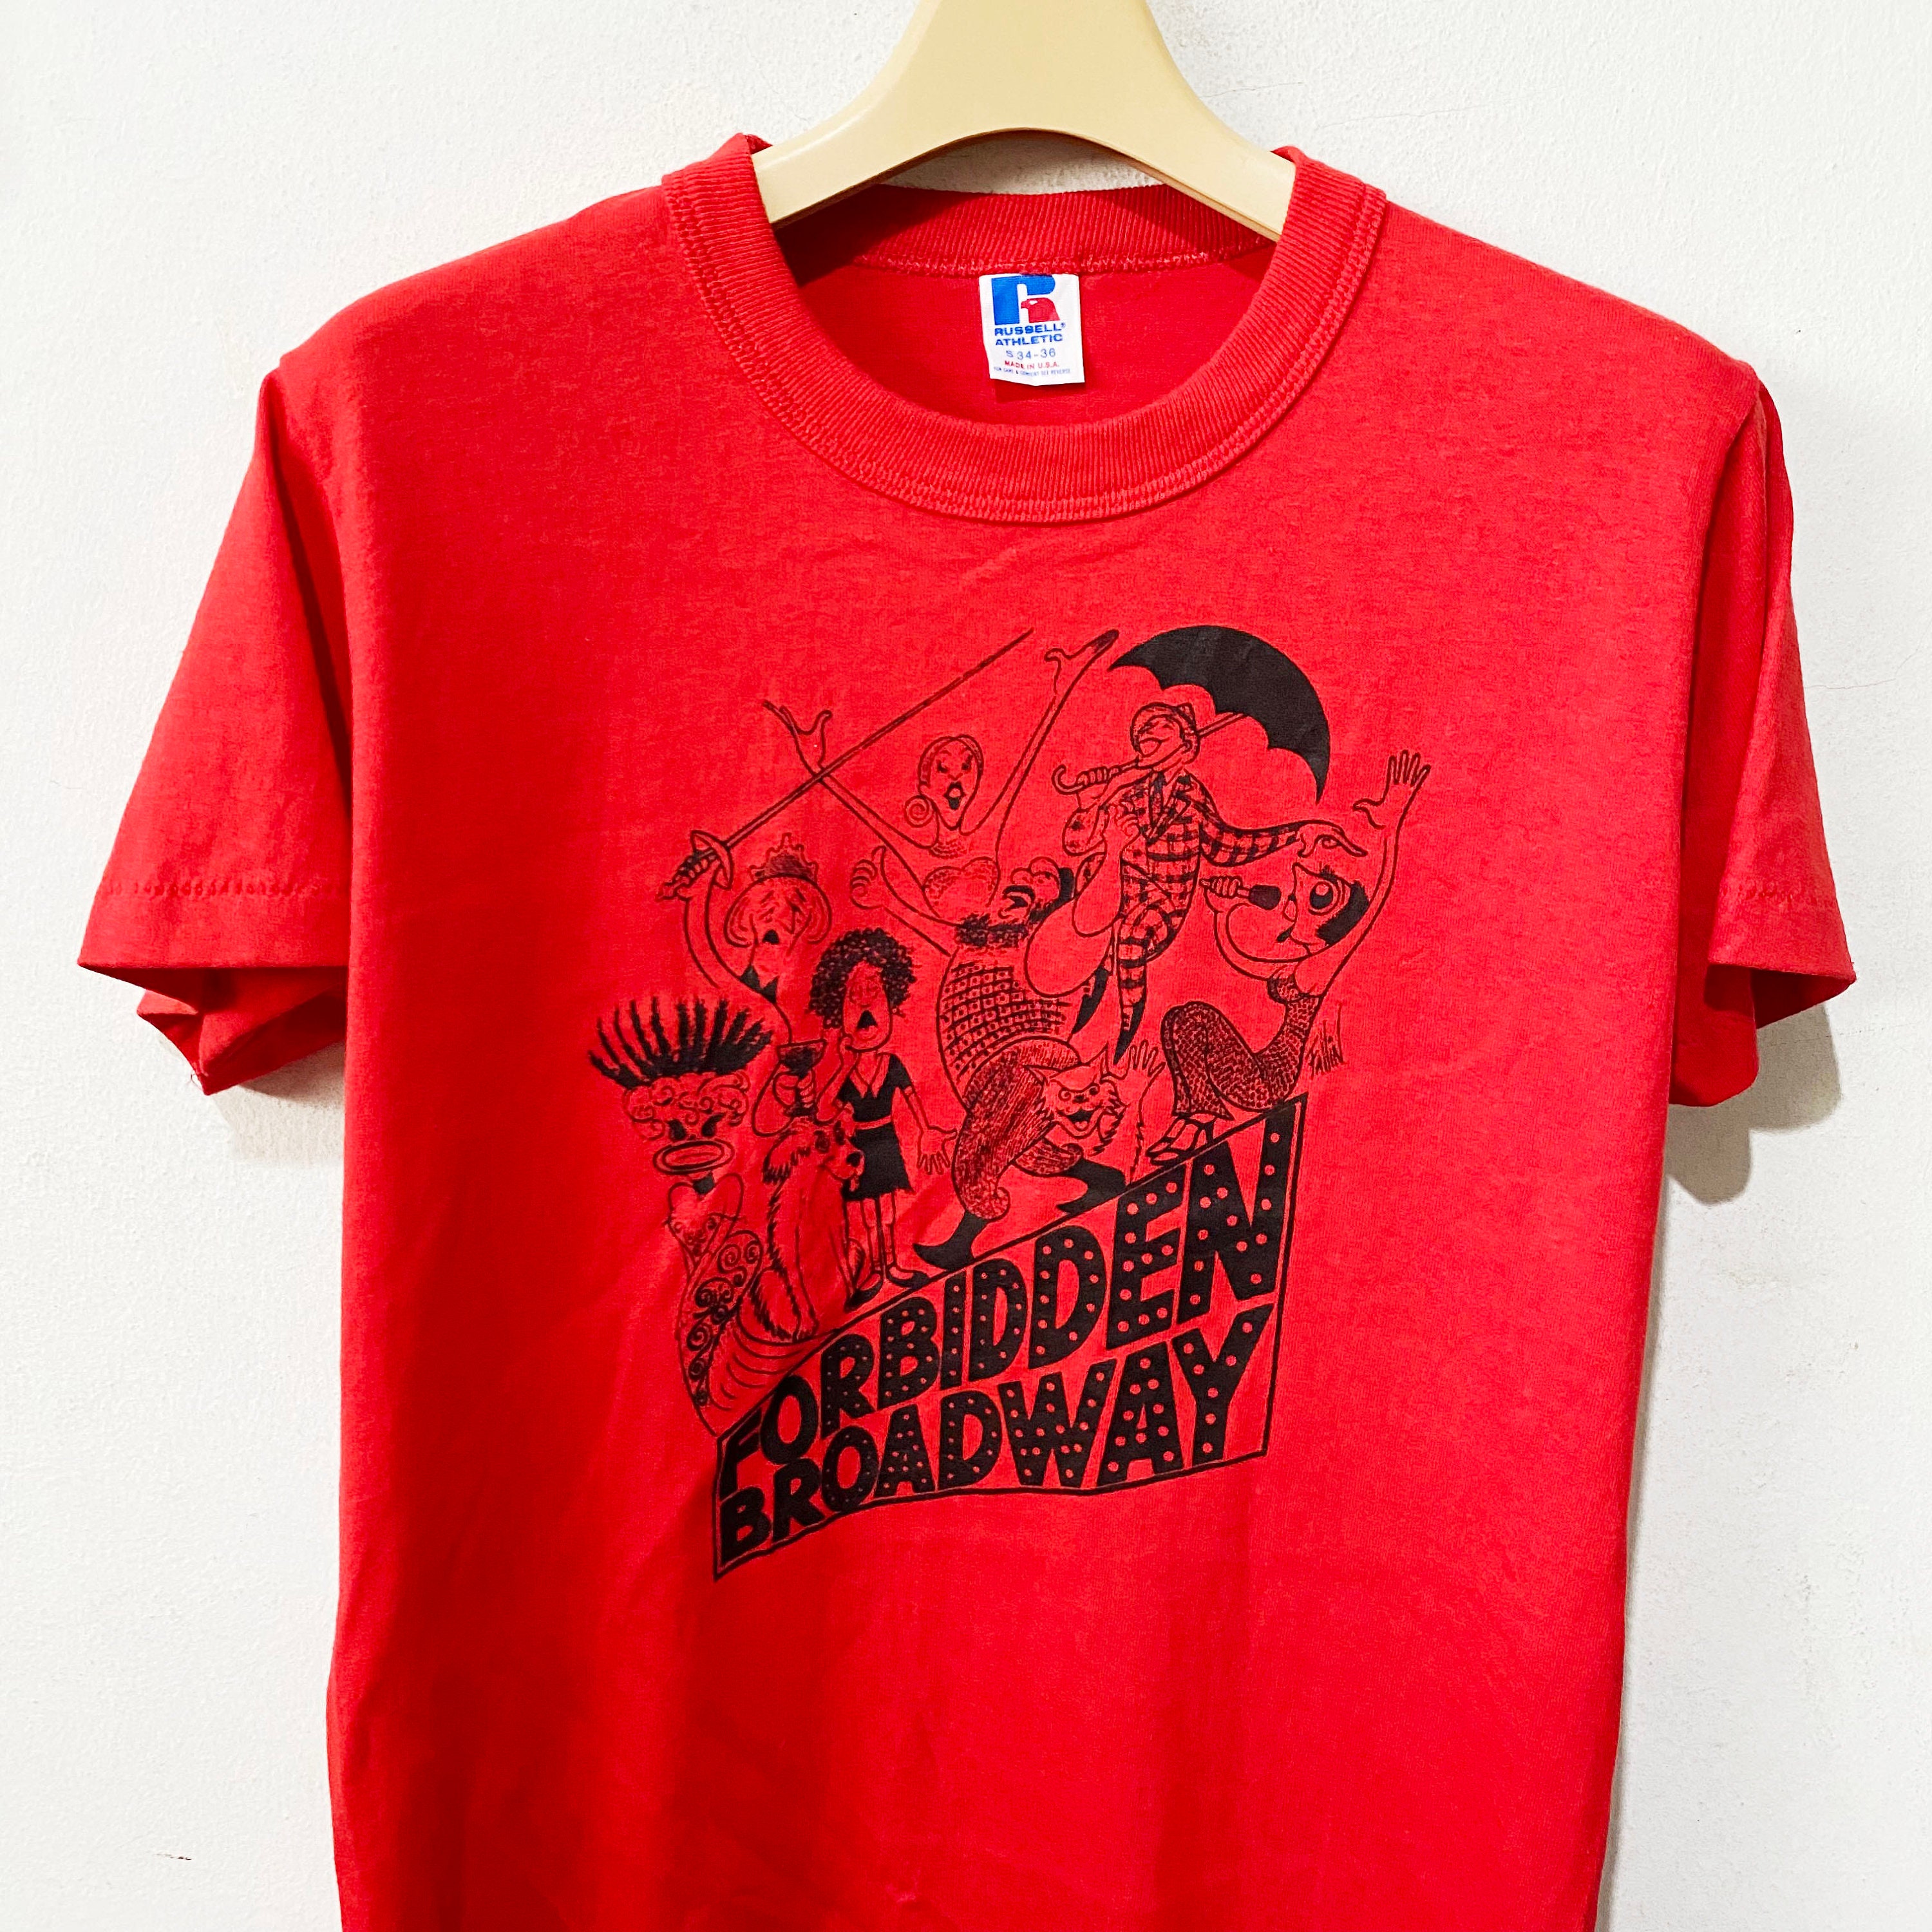 Vintage 80s Forbidden Broadway Shirt Size S Free Shipping